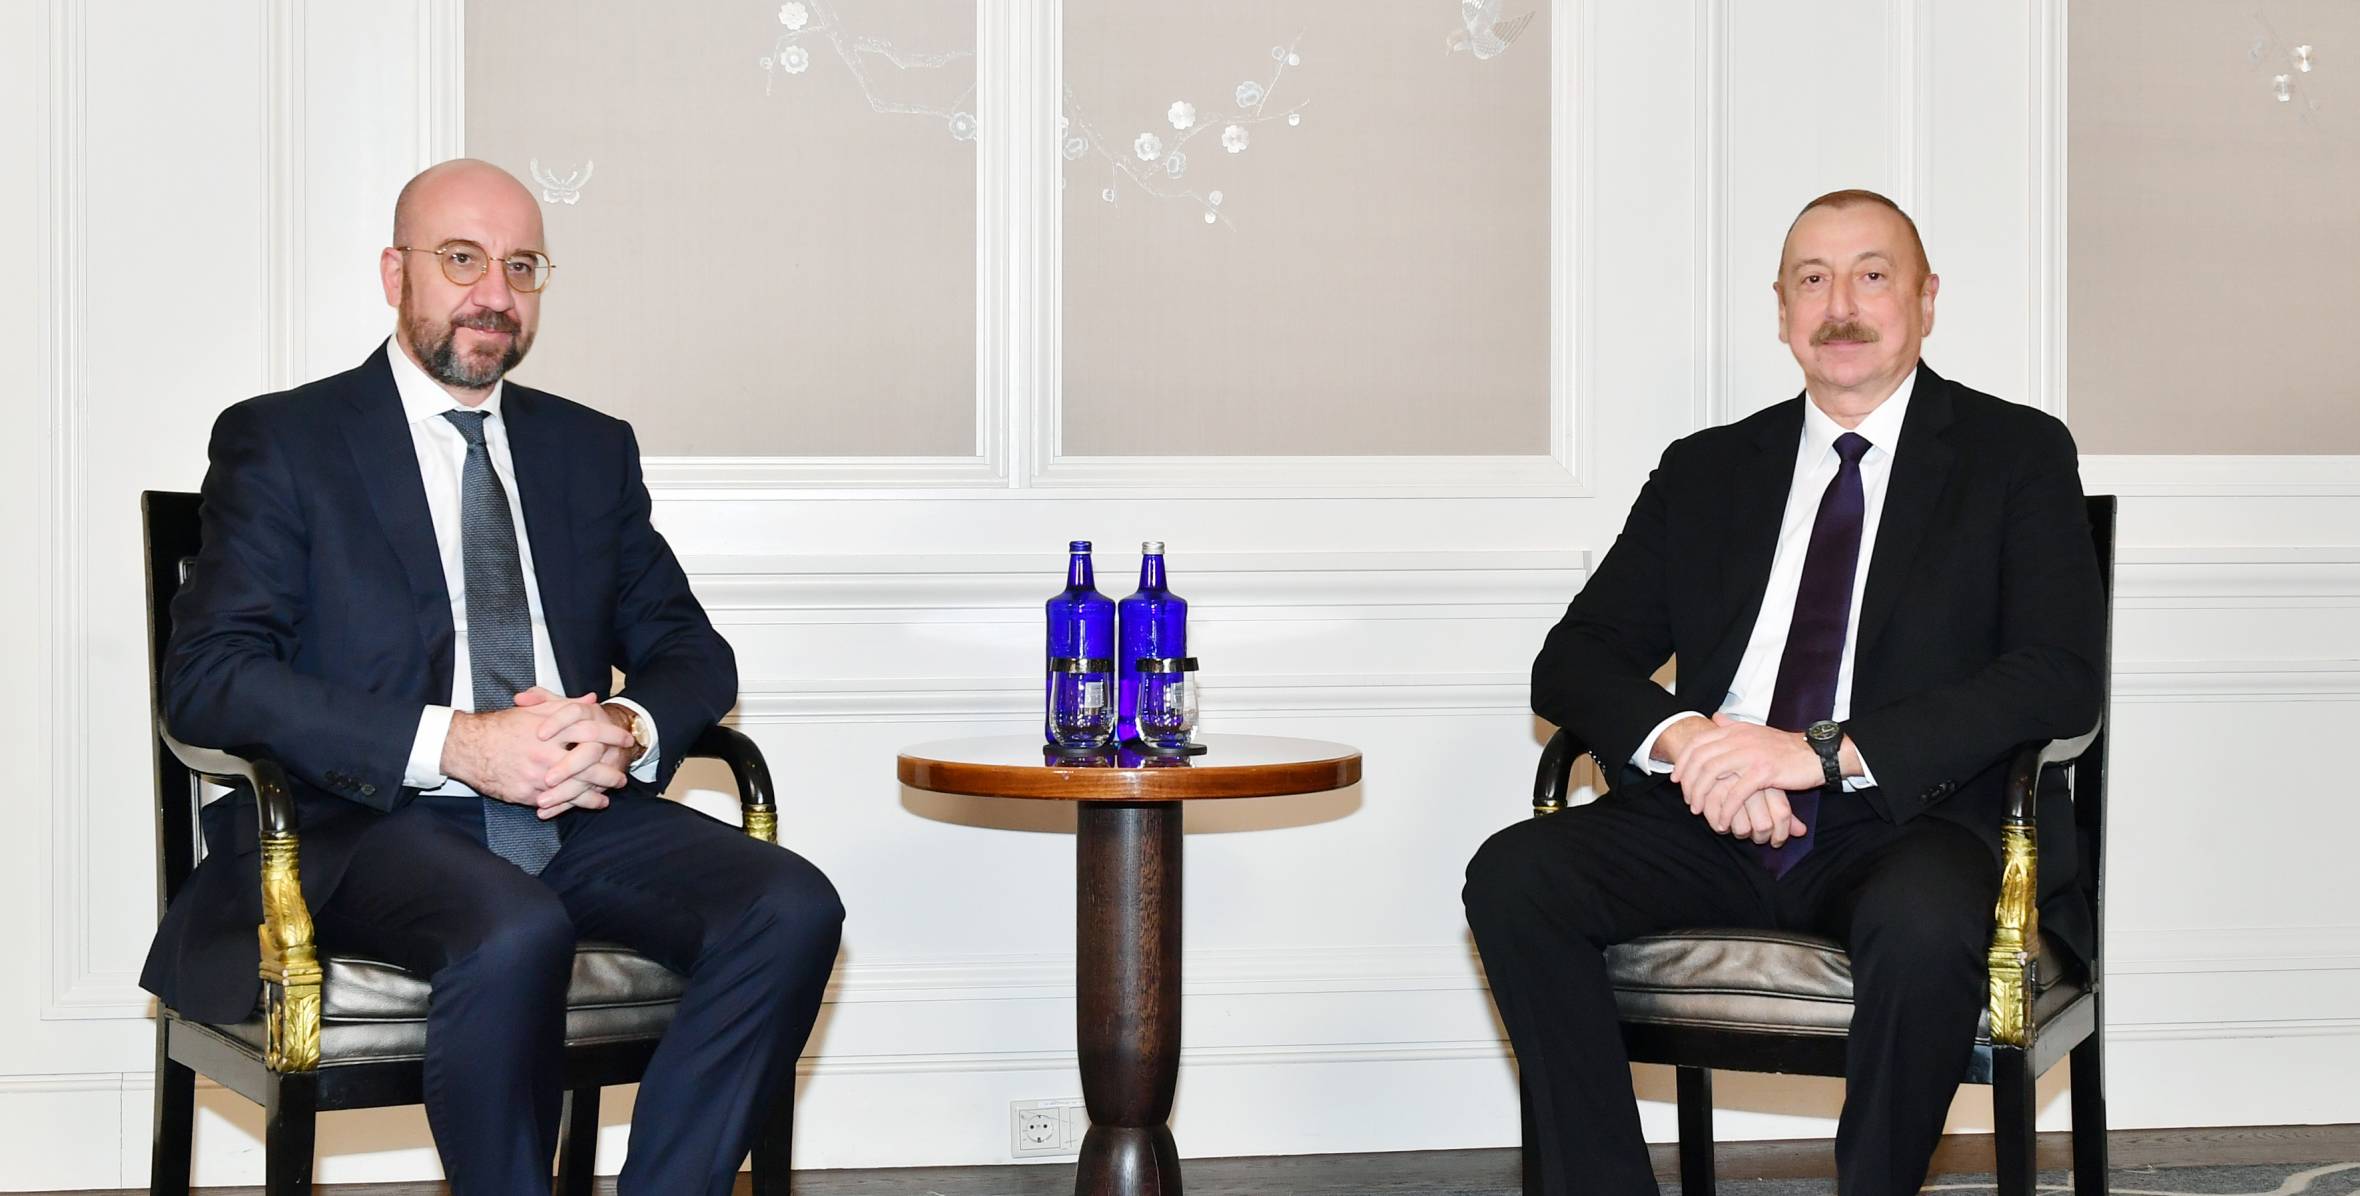 Ilham Aliyev met with President of European Council in Munich